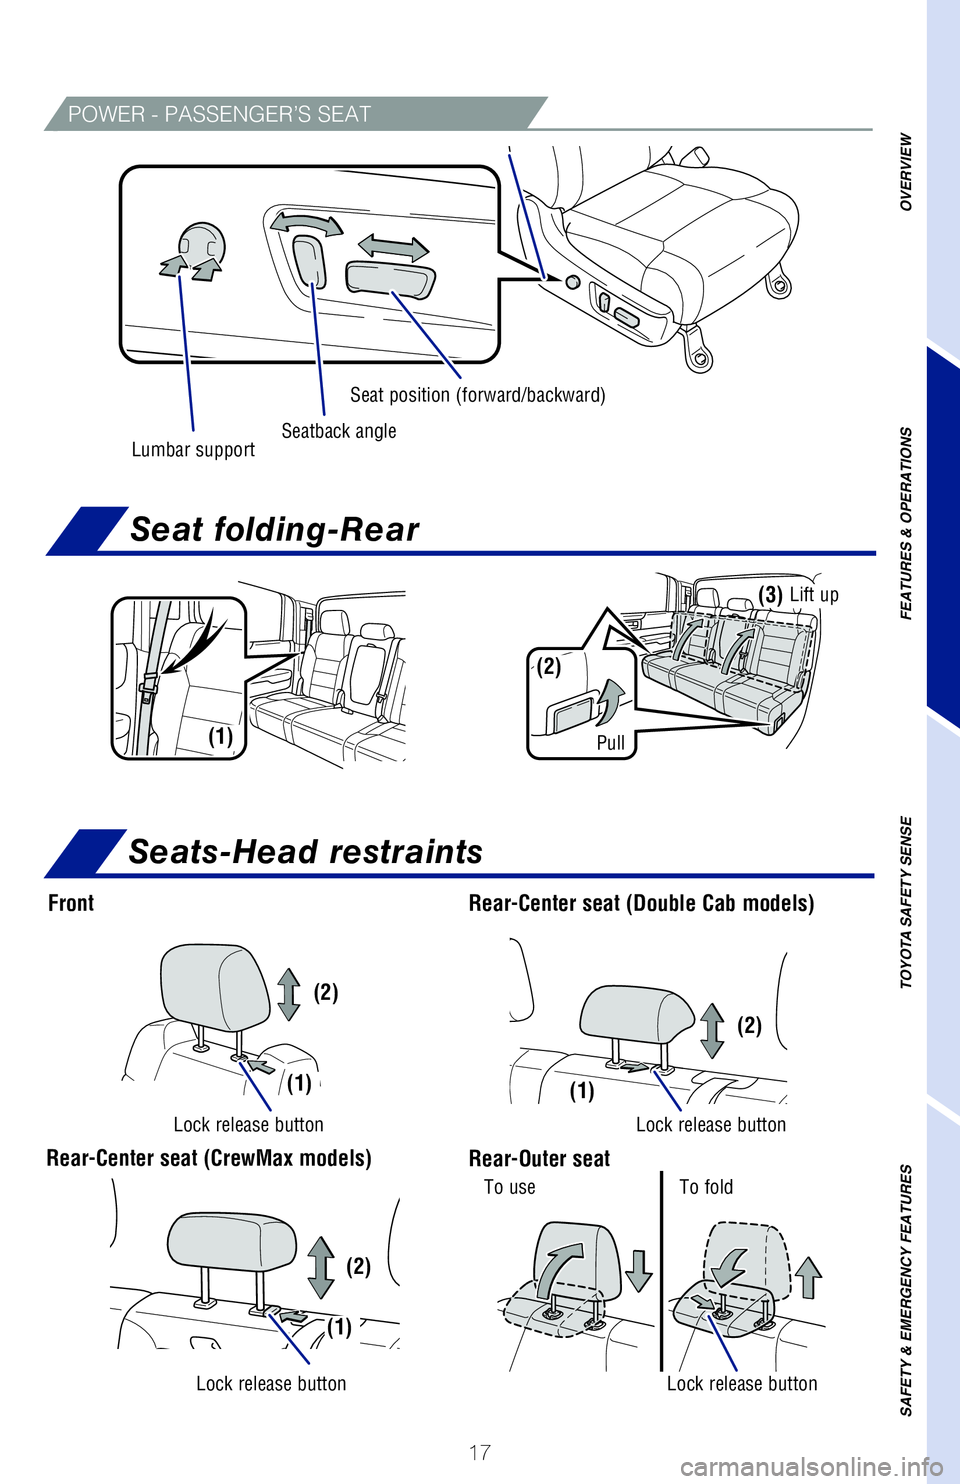 TOYOTA TUNDRA 2020   (in English) User Guide 17
POWER - PASSENGER’S SEAT
Seat position (forward/backward)
Seatback angle
Seats-Head restraints
Seat folding-Rear
Front
(1)
(1)
(1)
(2)
(2)
(2)
To useTo fold
Rear-Center seat (CrewMax models)
Rear